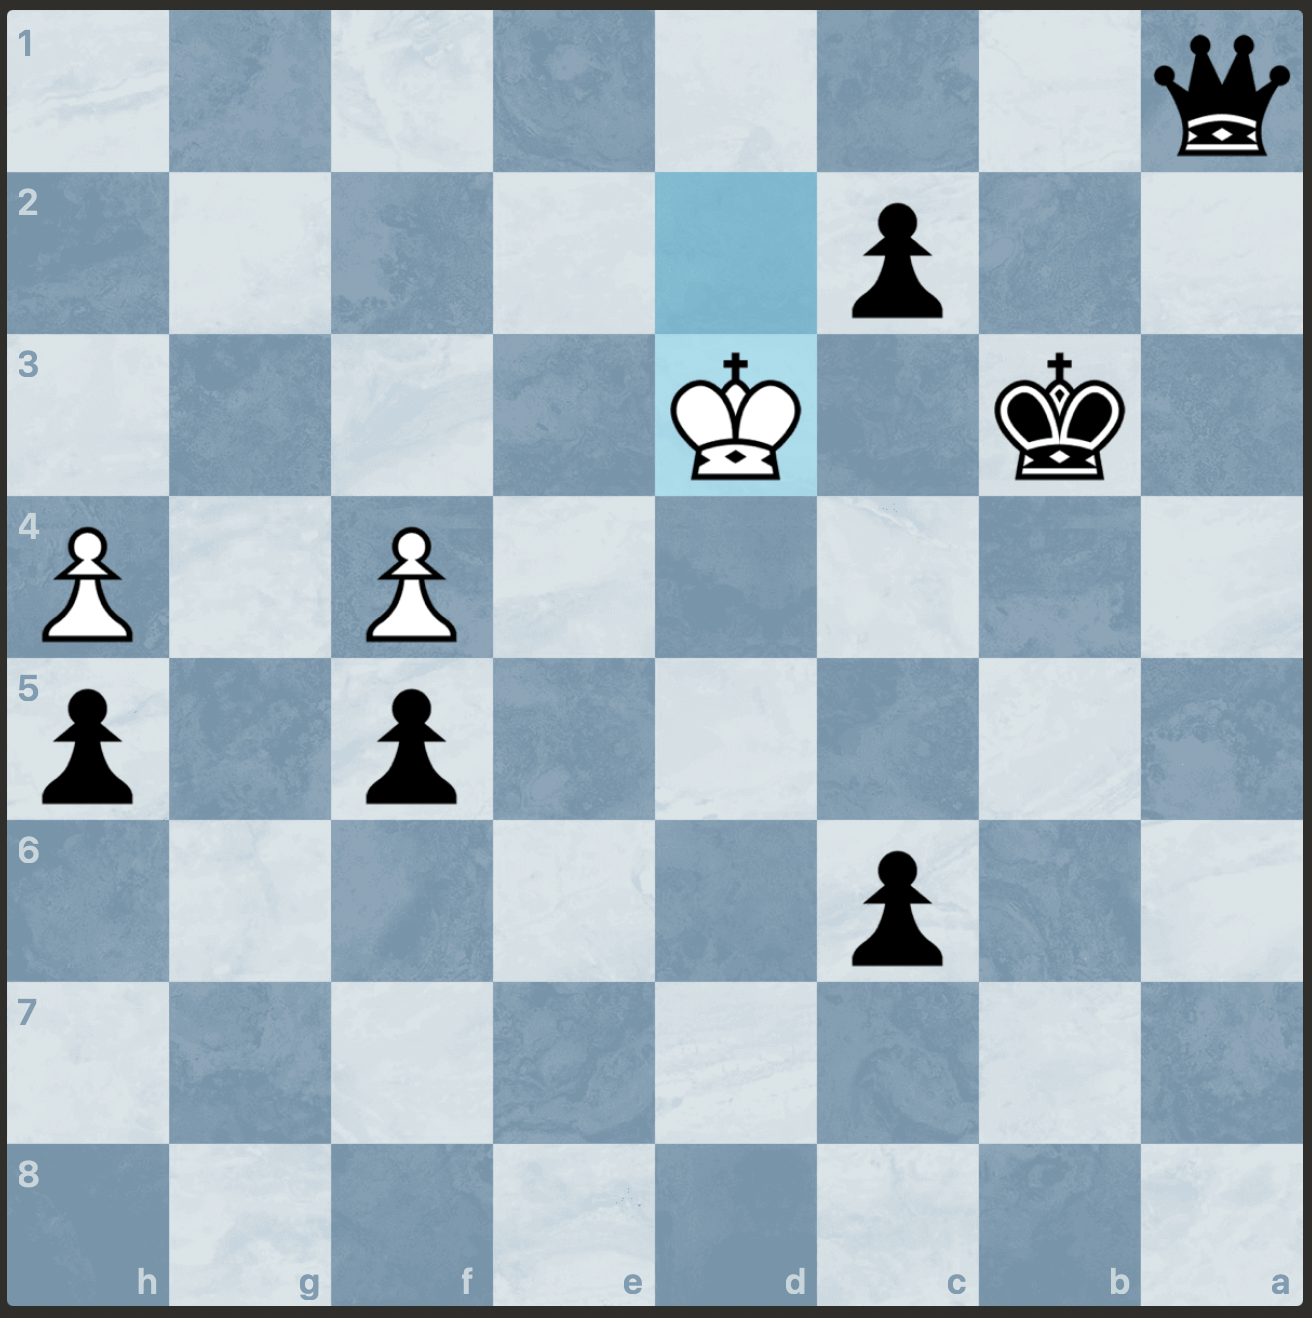 checkmate in 1 puzzle - Chess Forums 